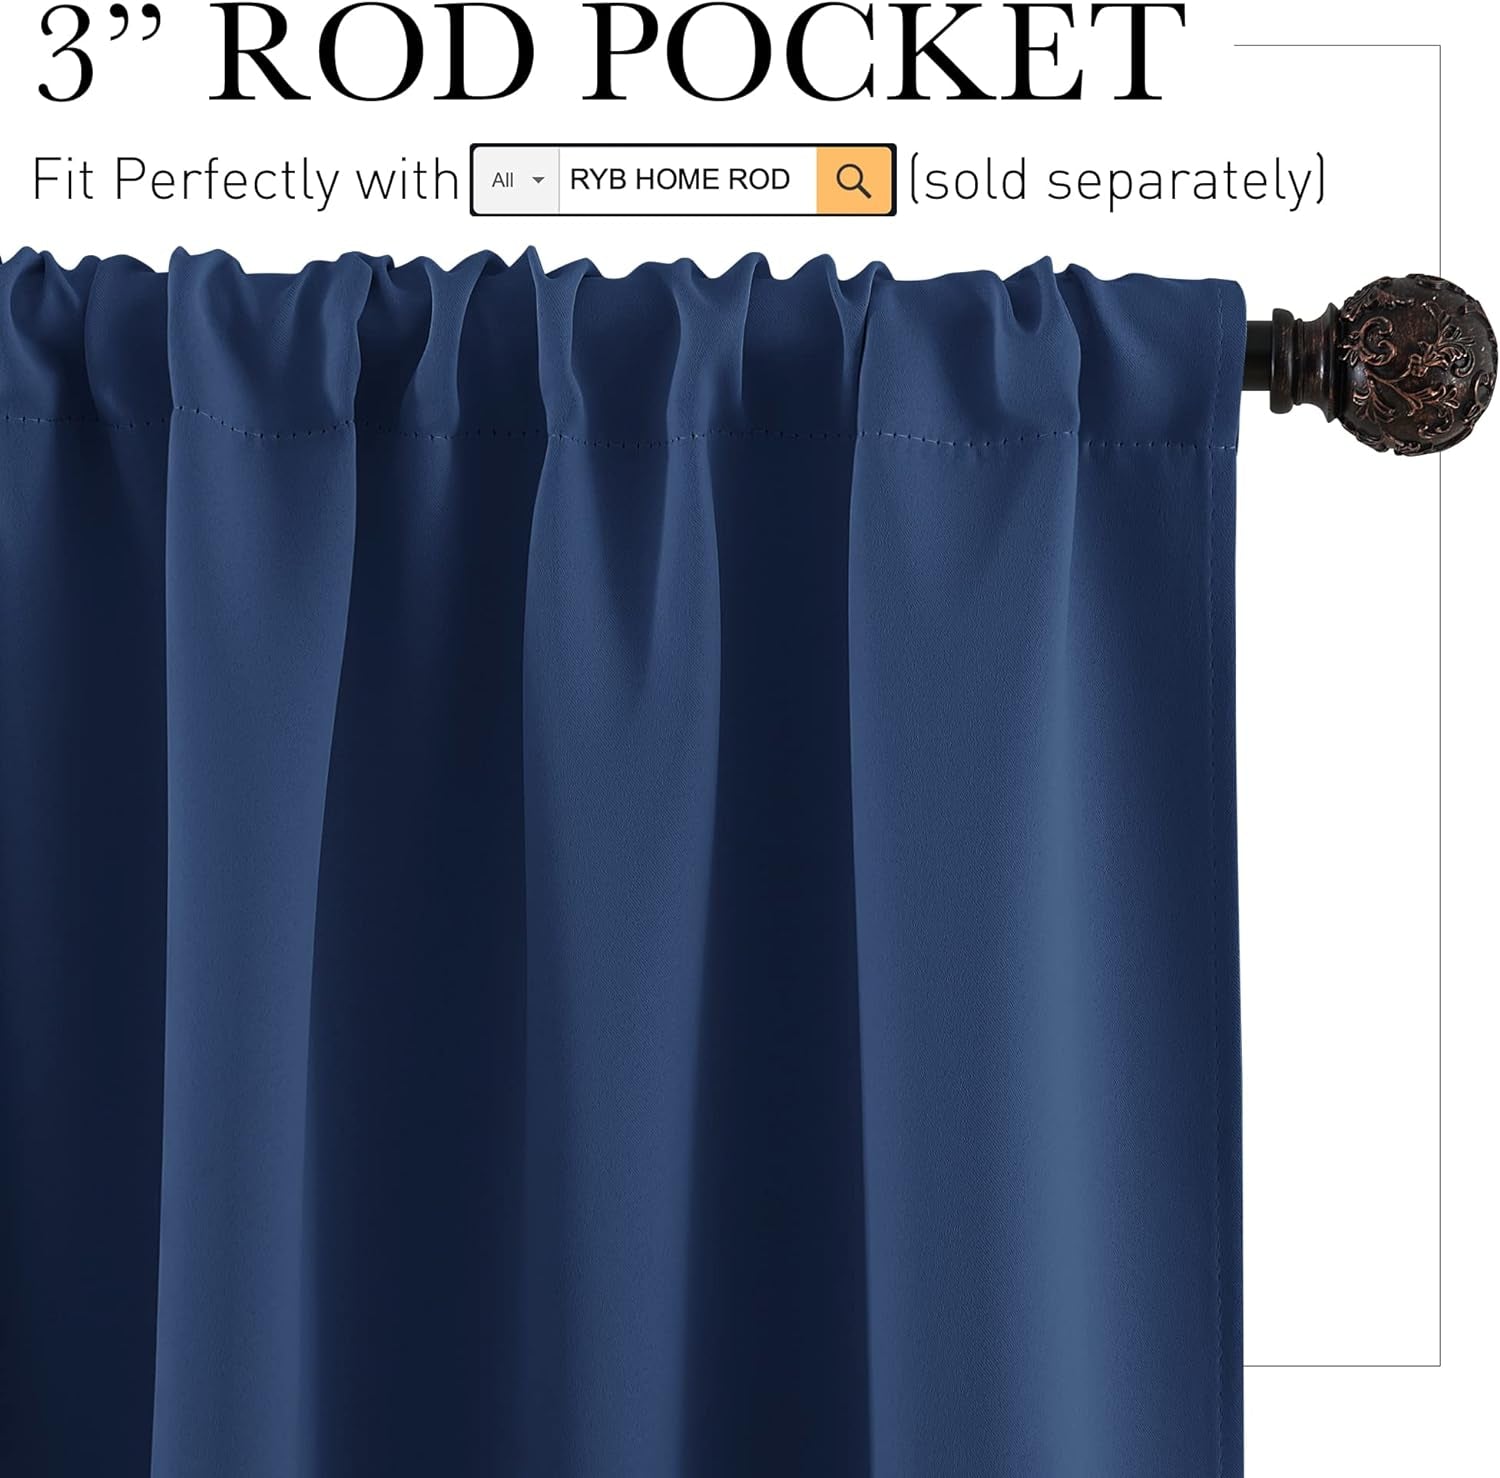 RYB HOME Blackout Curtains Small Window Decor Light Block Thermal Insulated Drapes for Bedroom Kitchen Cabinet Basement RV Curtains, W 42 X L 36 Inch, Navy Blue, 2 Panels  RYB HOME   